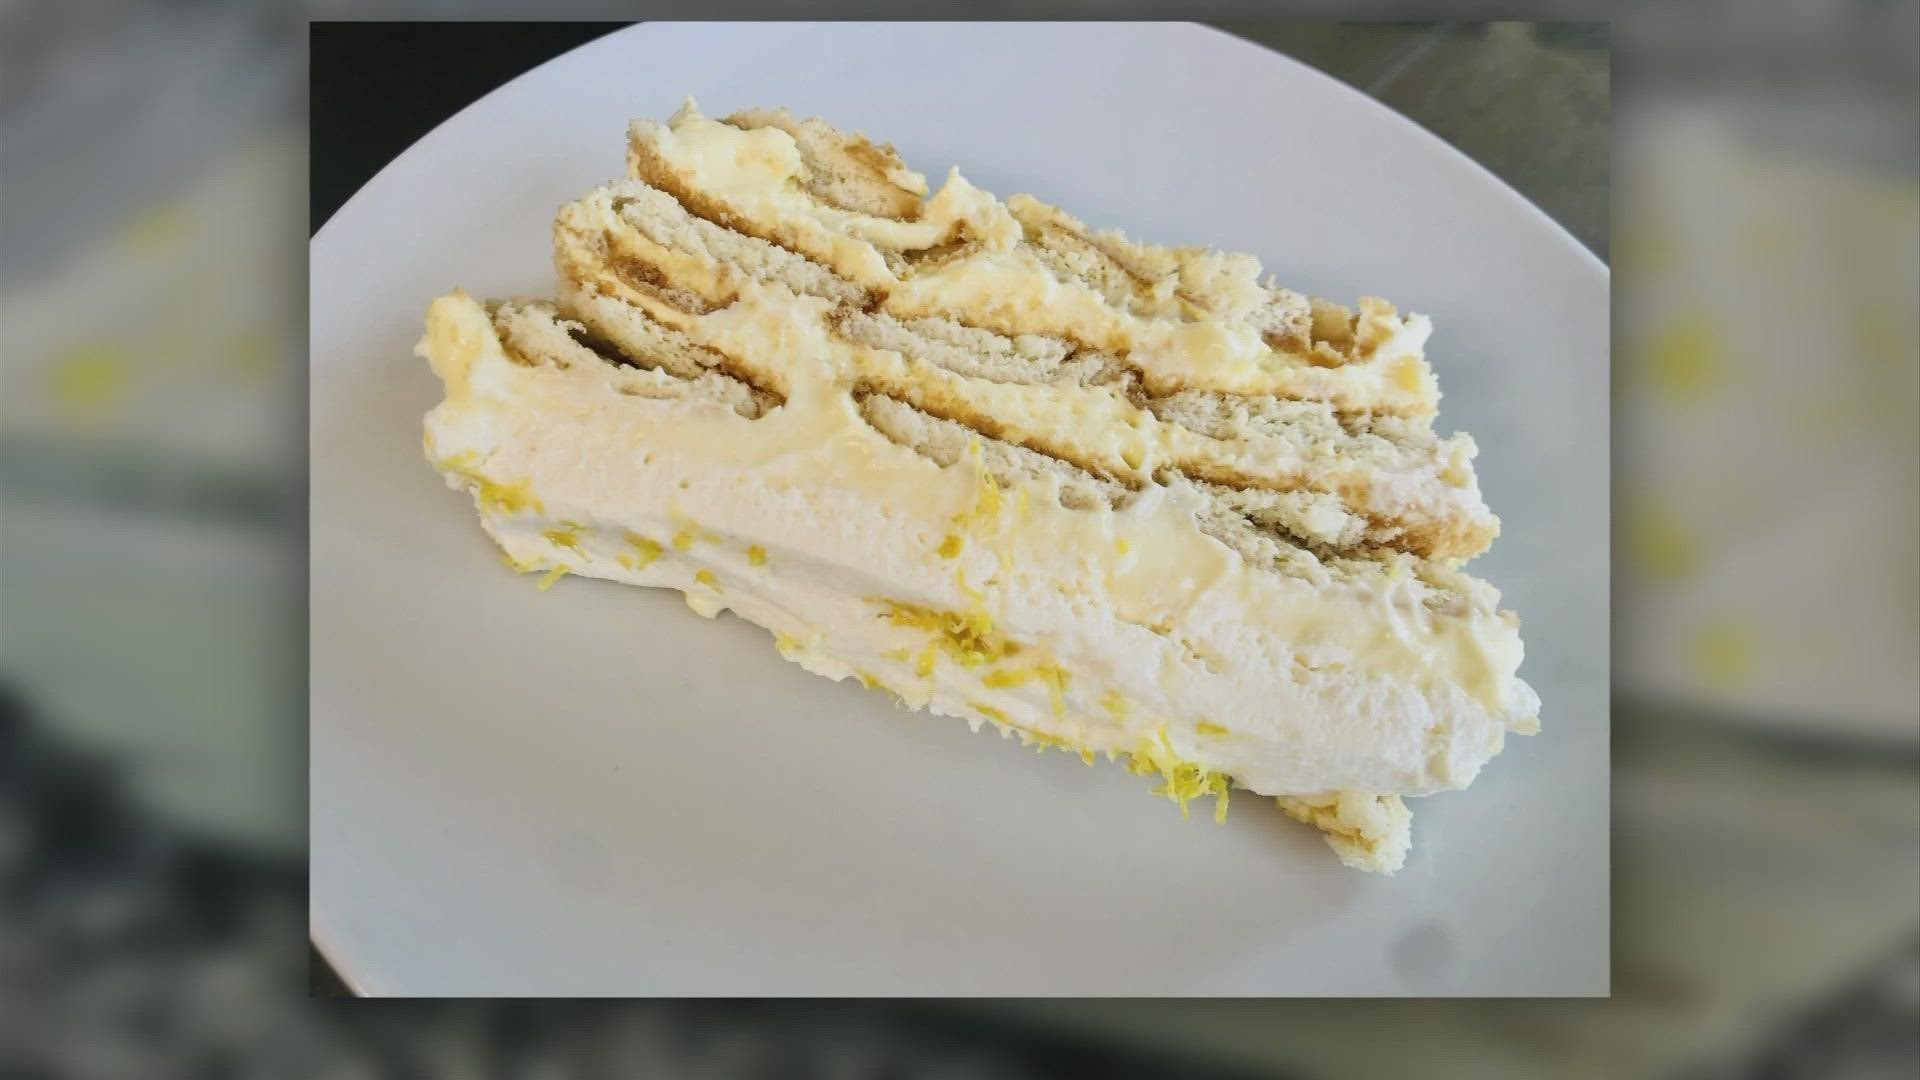 10TV's Brittany Bailey's mom loves lemons, so Brittany made her a lemon icebox cake for Mother's Day.